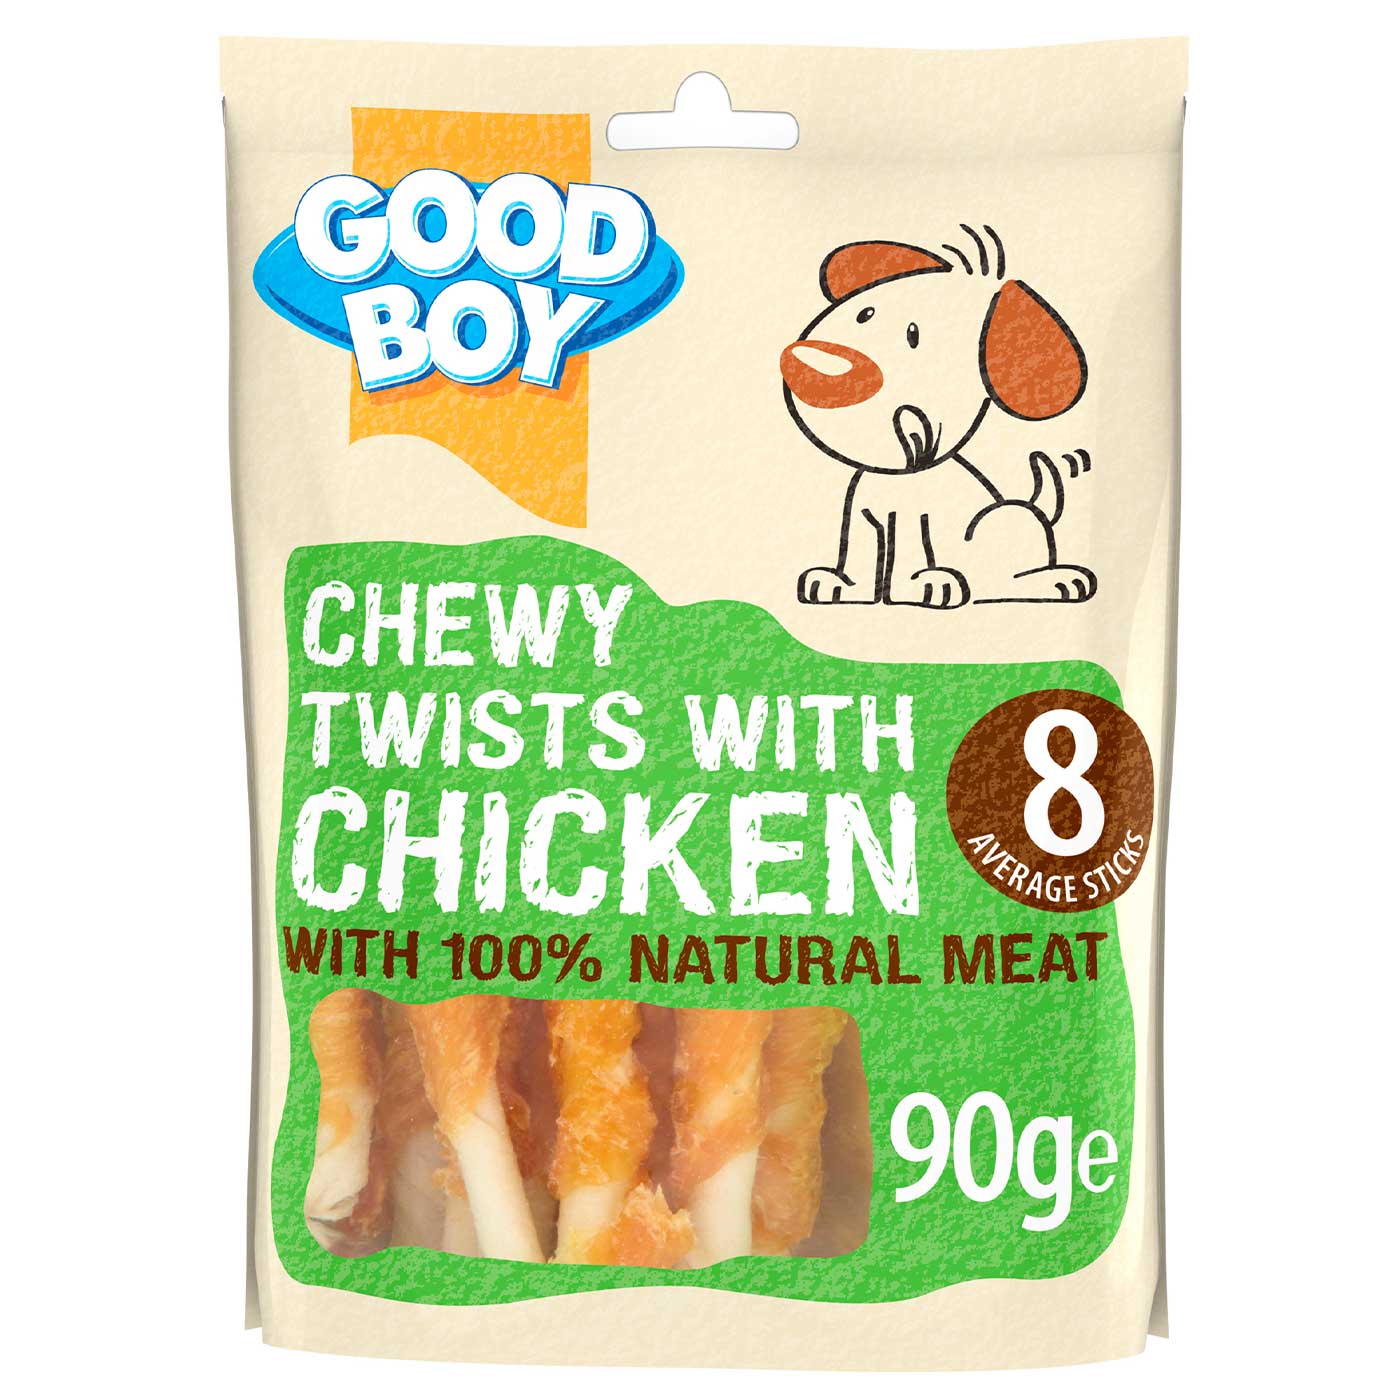 Good Boy Chewy Twists With Chicken